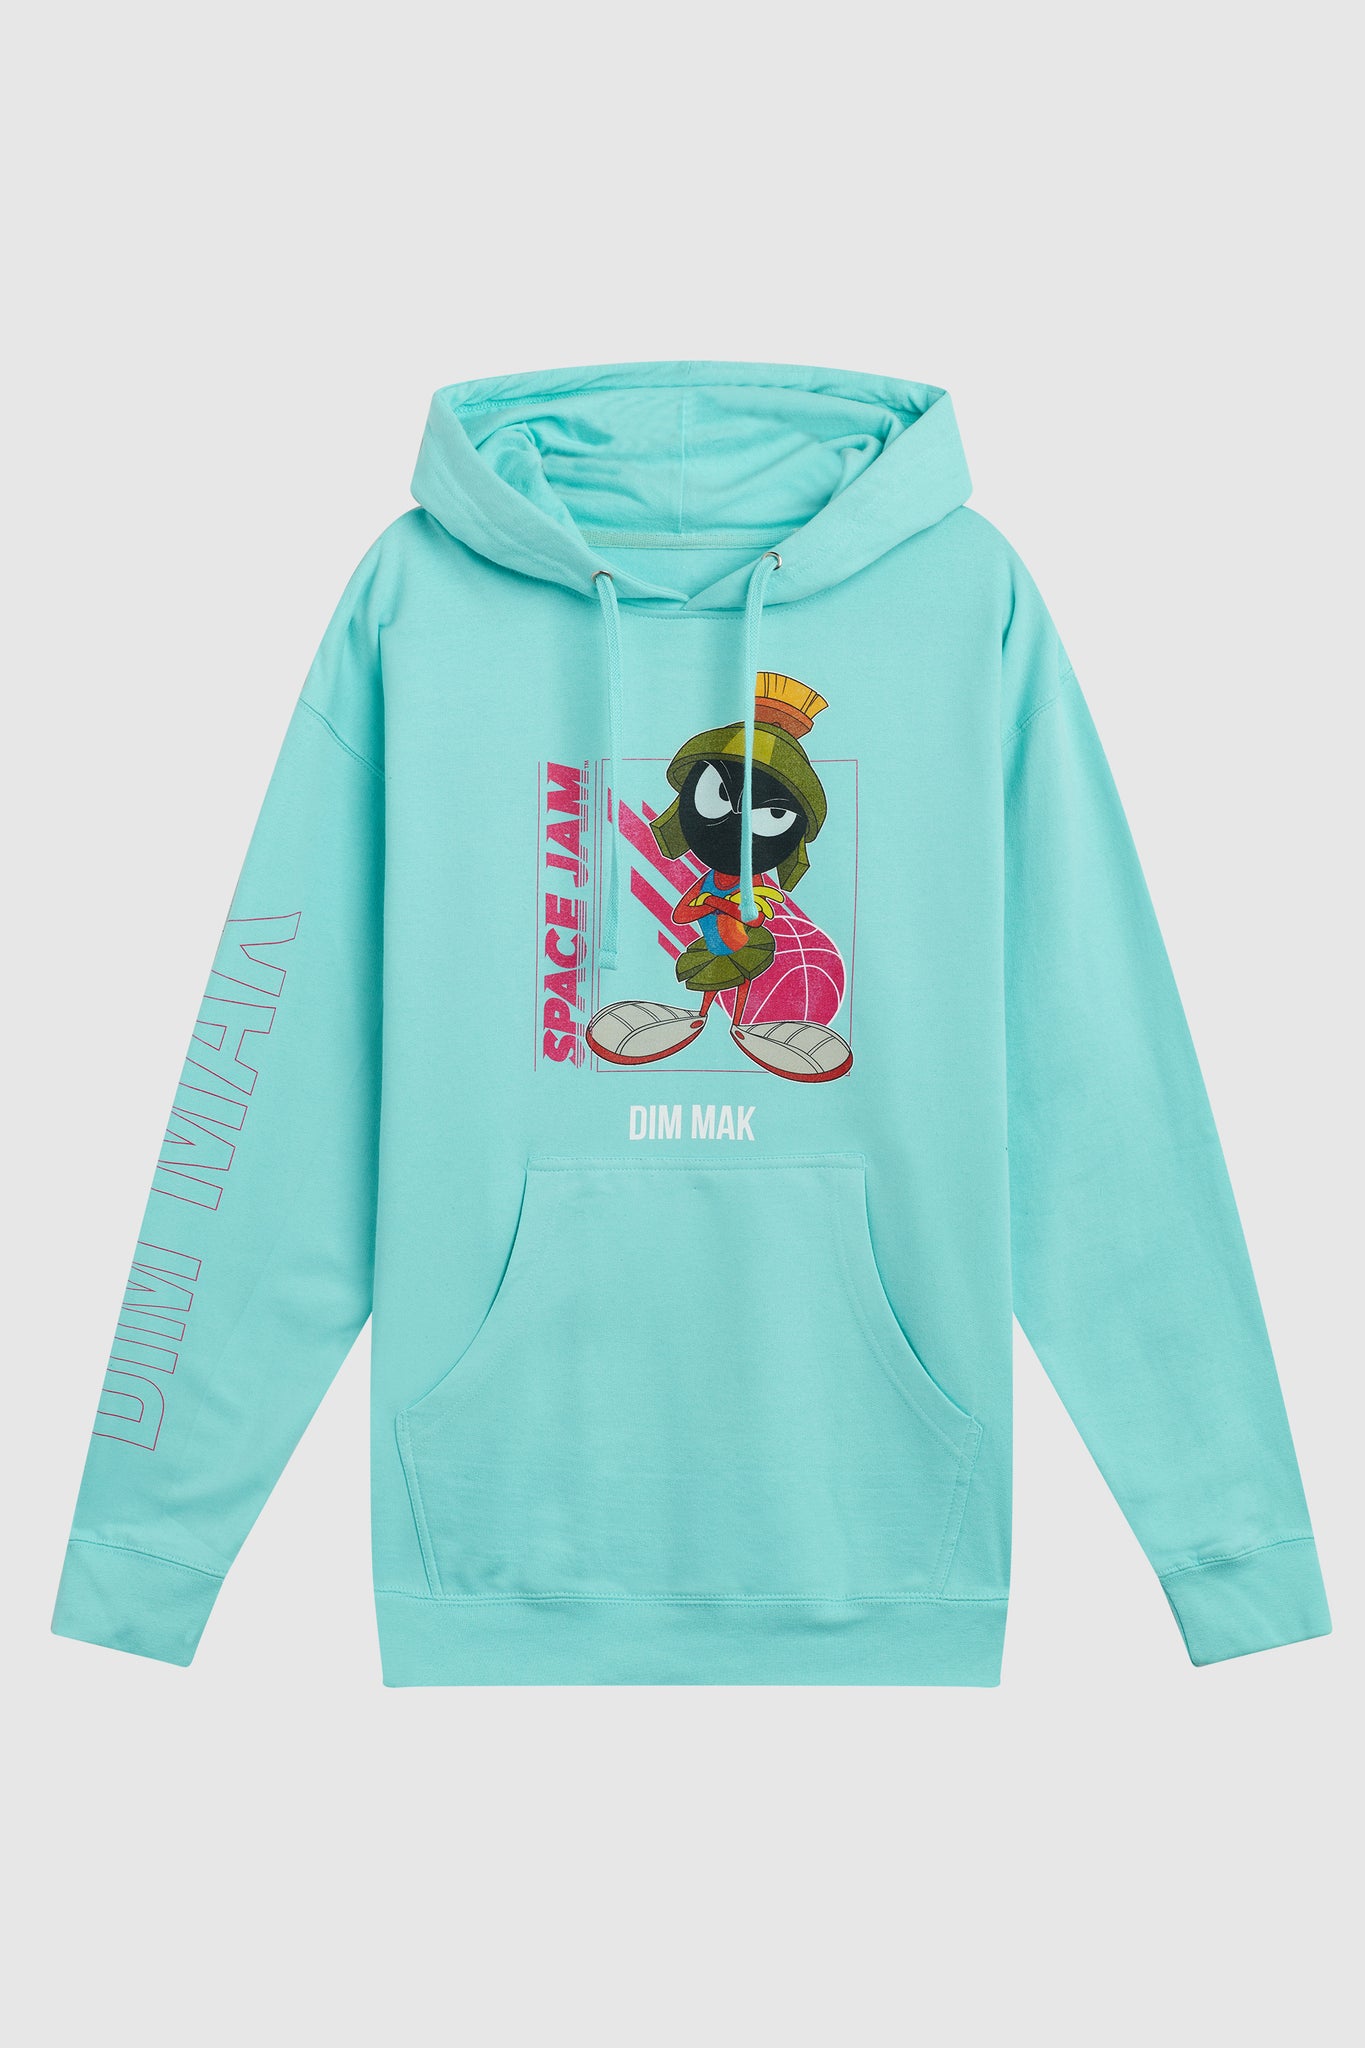 Dim Mak x Space Jam: A New Legacy - Marvin the Martian Hoodie - Mint